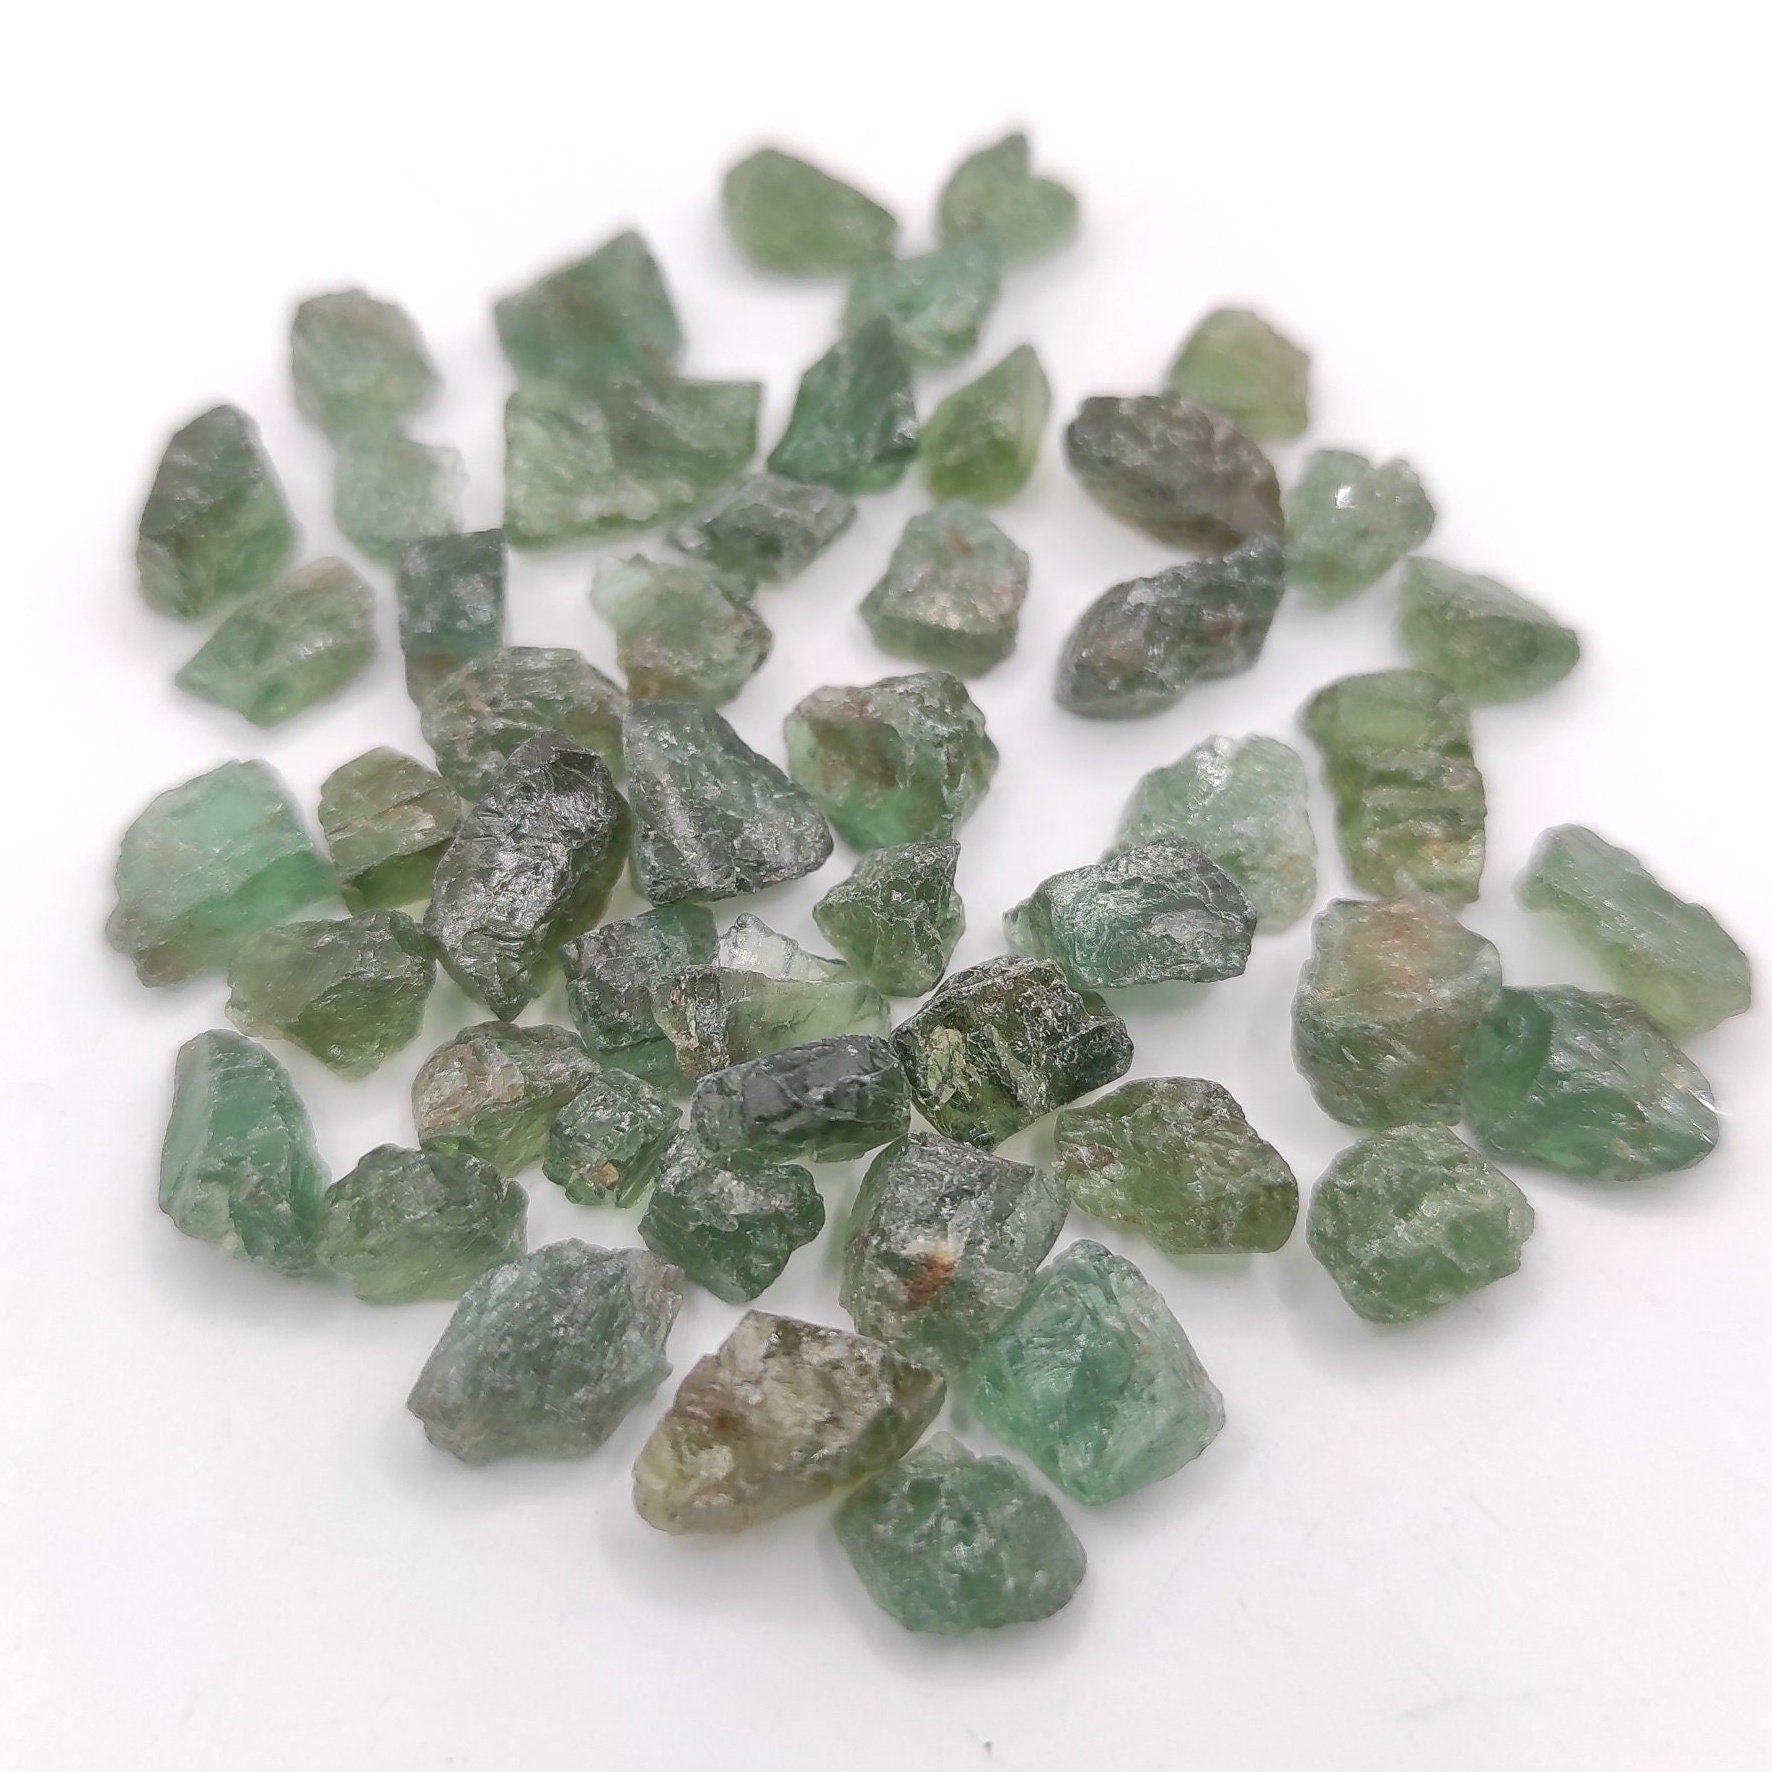 97ct Green Apatite Pieces - Mini Apatite Crystals from Madagascar - Raw Green Apatite Stones - Rough Apatite Crystal Gravel